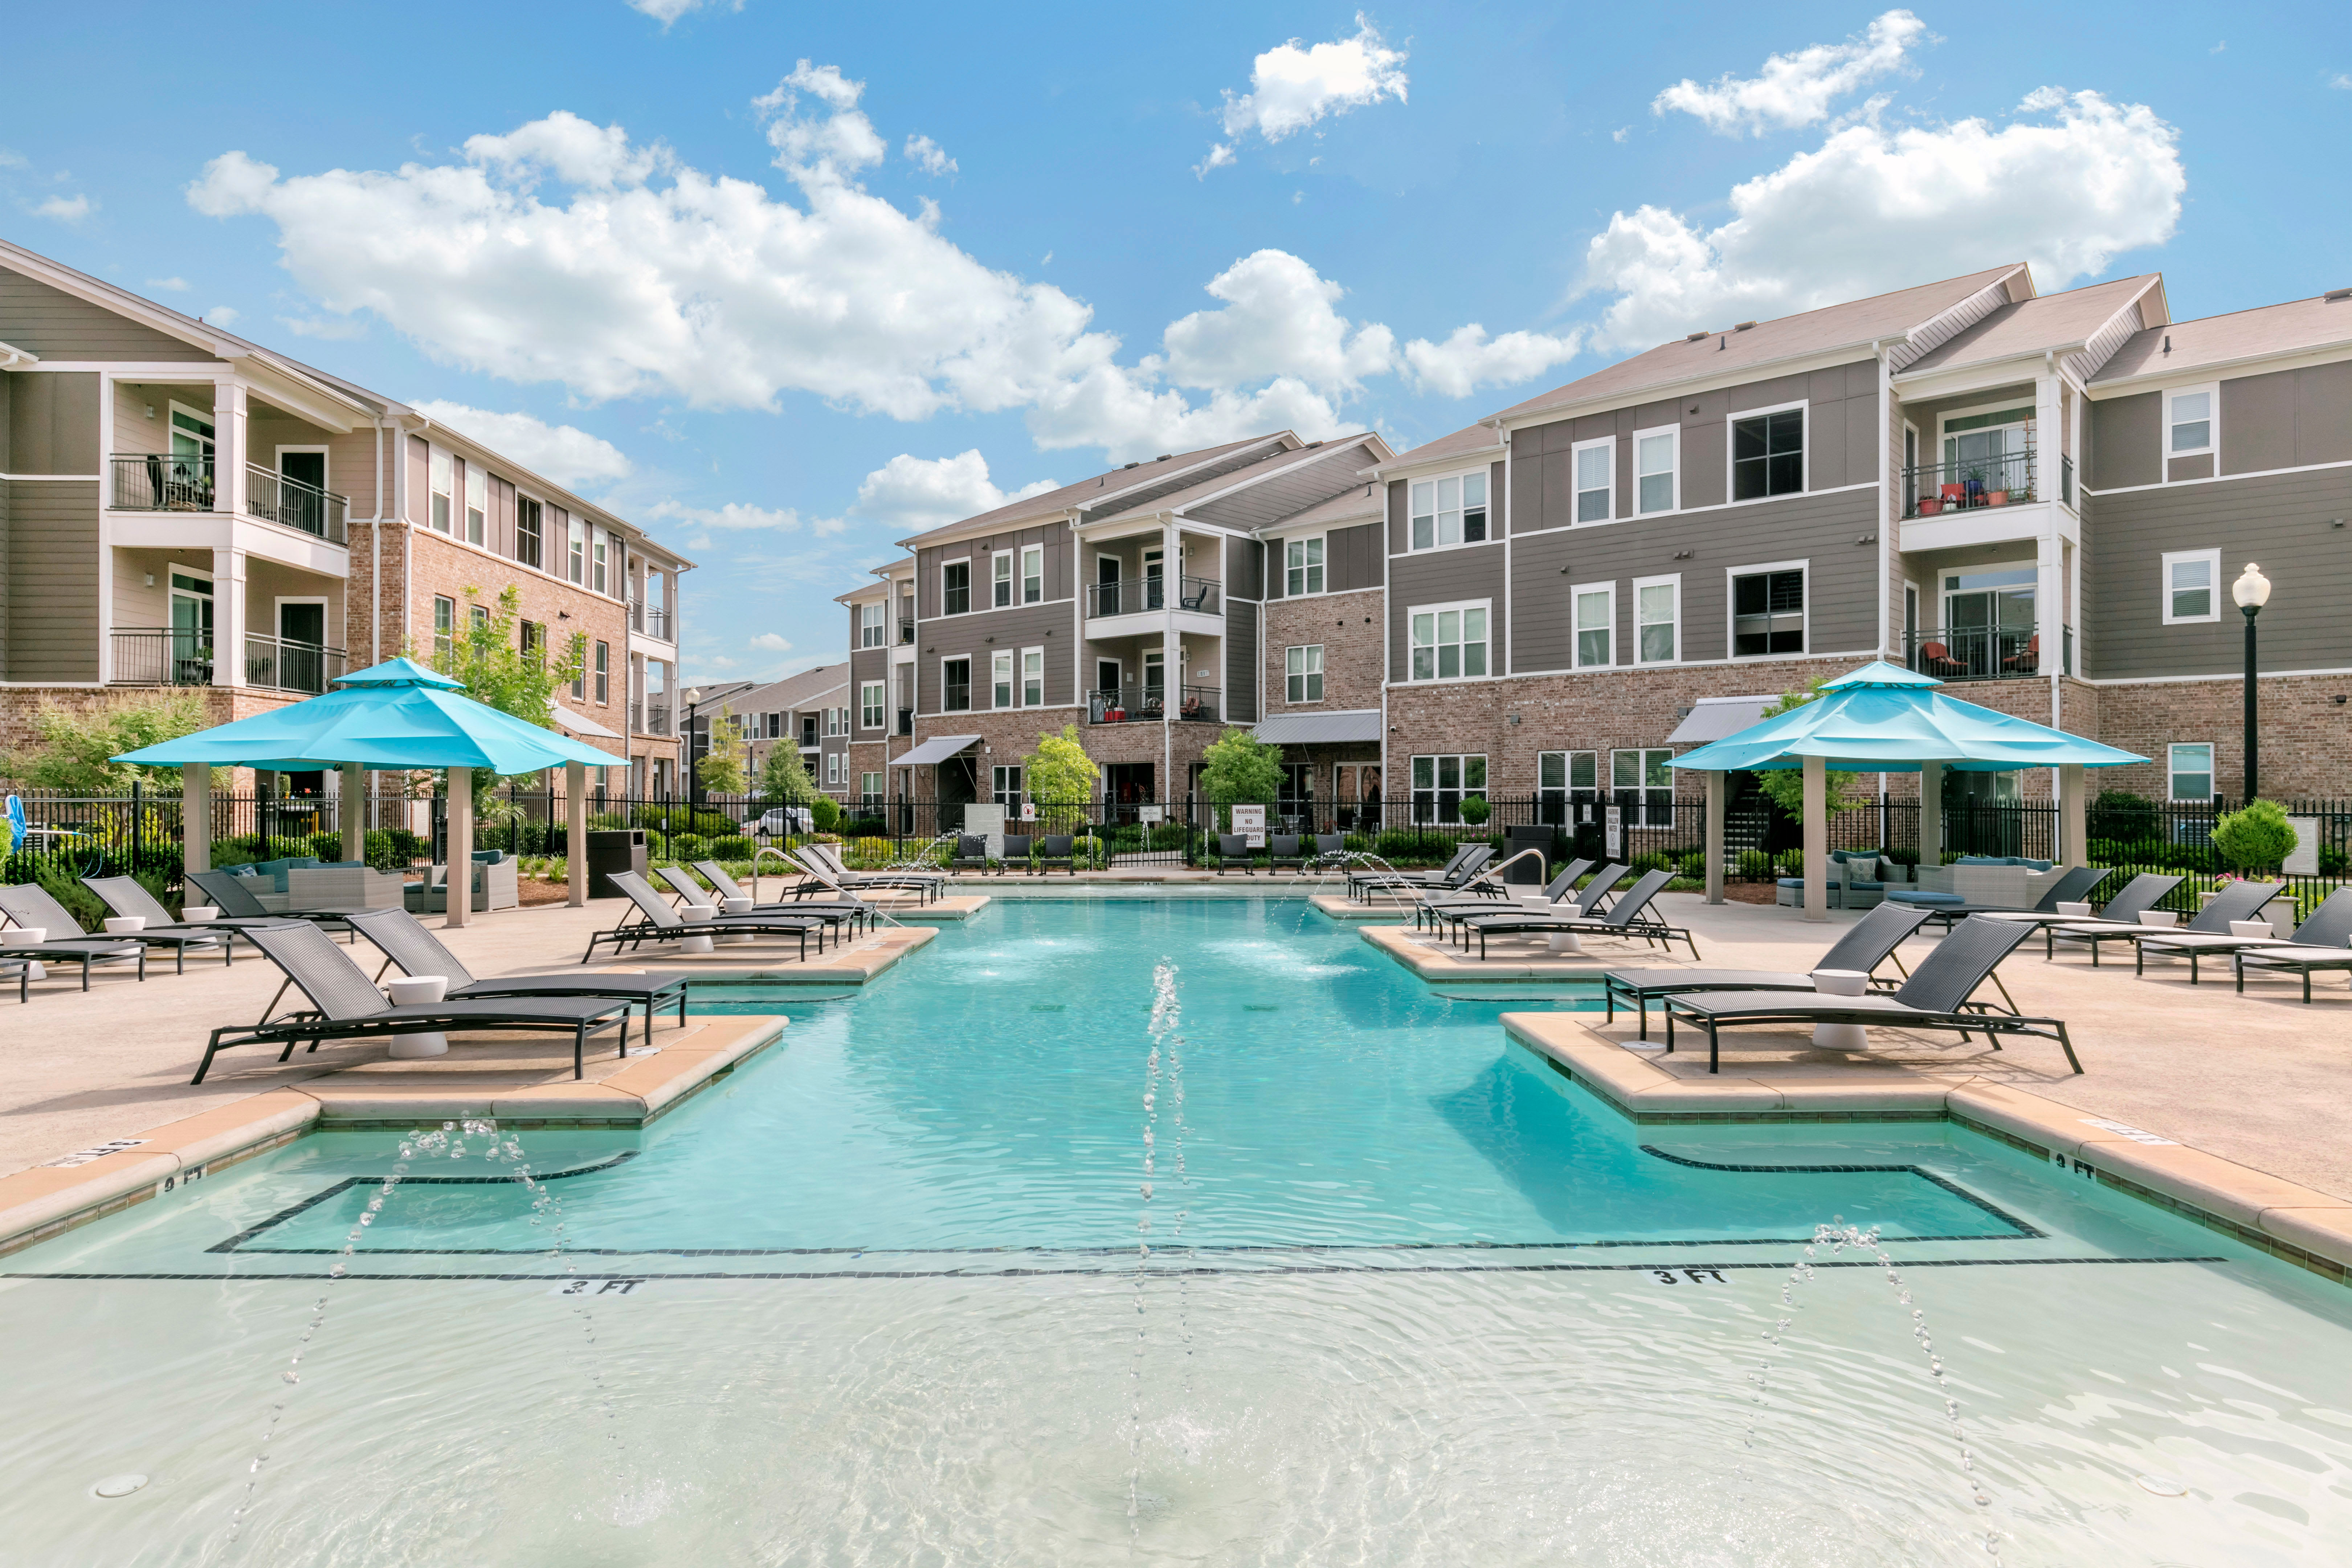 Sparkling swimming pool with poolside cabanas at The Village at Apison Pike in Ooltewah, Tennessee